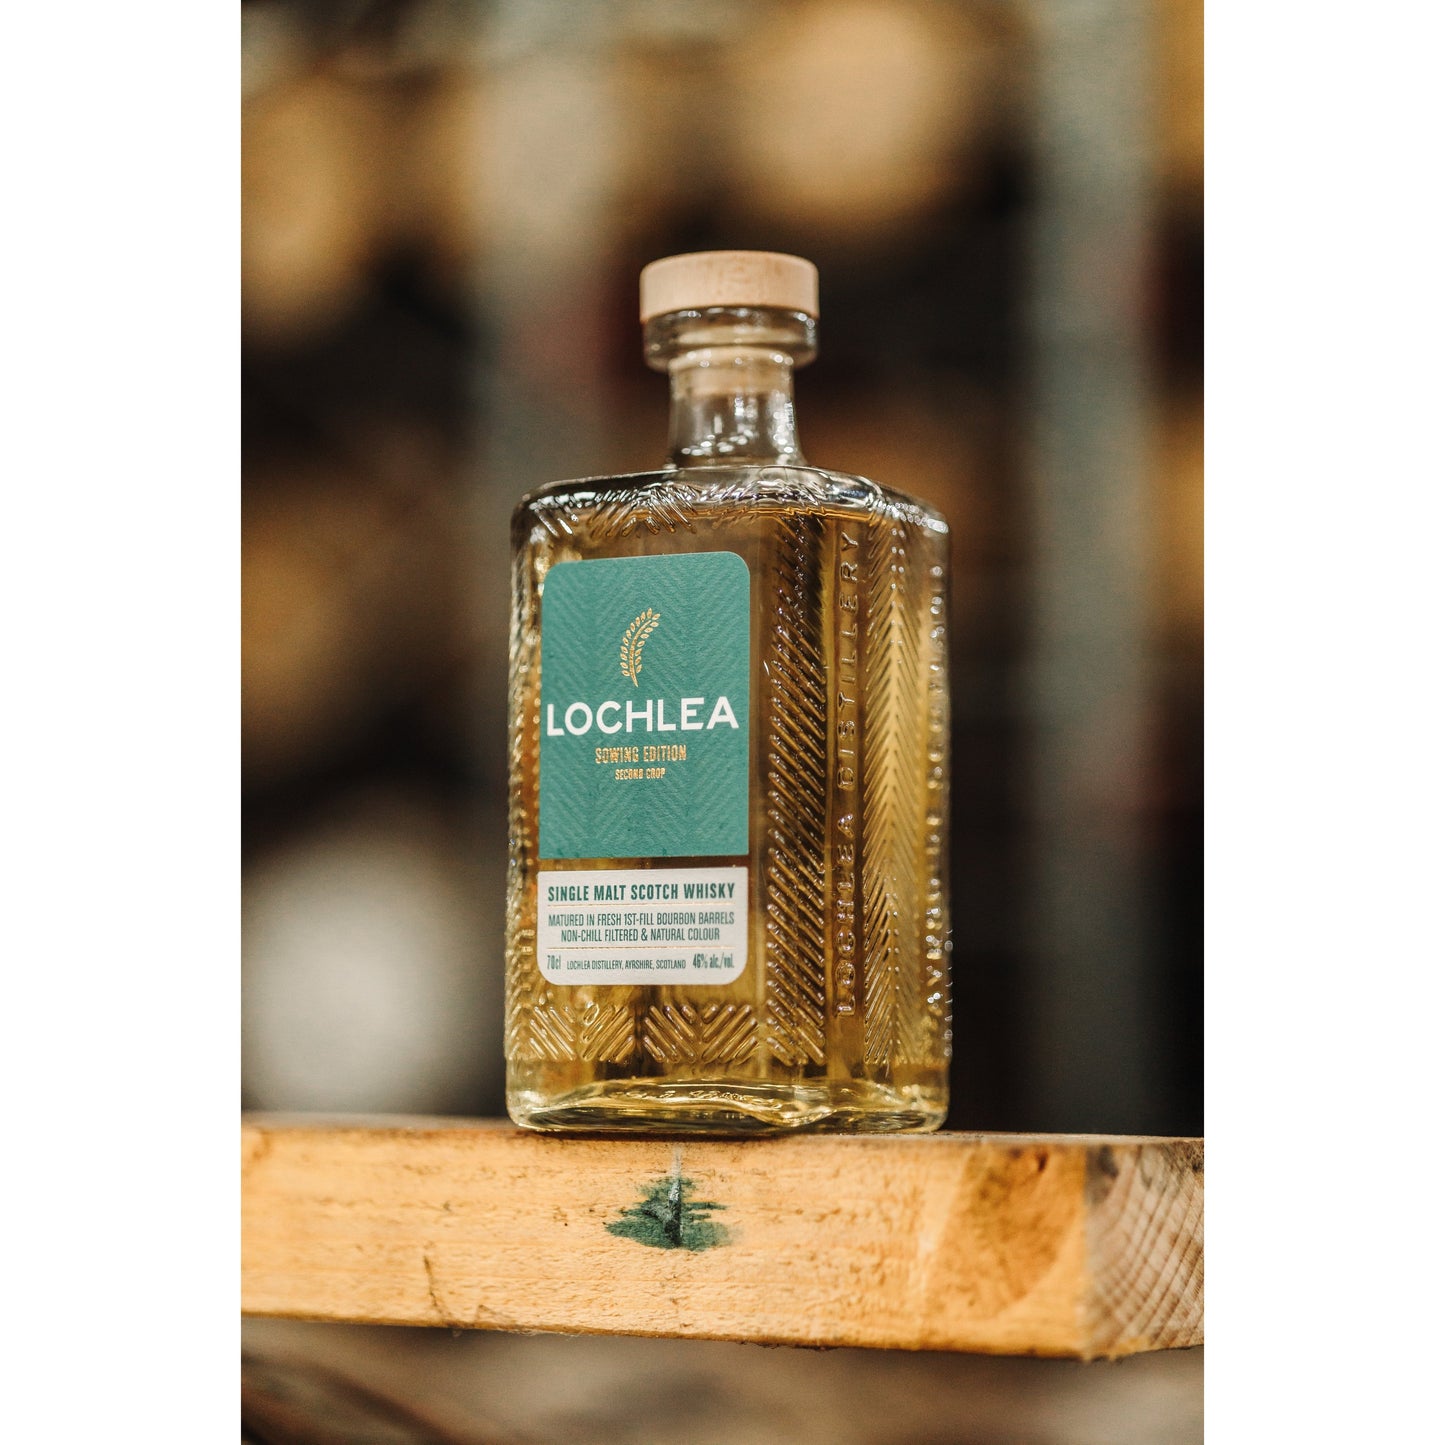 Lochlea Sowing Edition (Second Crop) - Single Malt Scotch Whisky-Single Malt Scotch Whisky-5065008253068-Fountainhall Wines